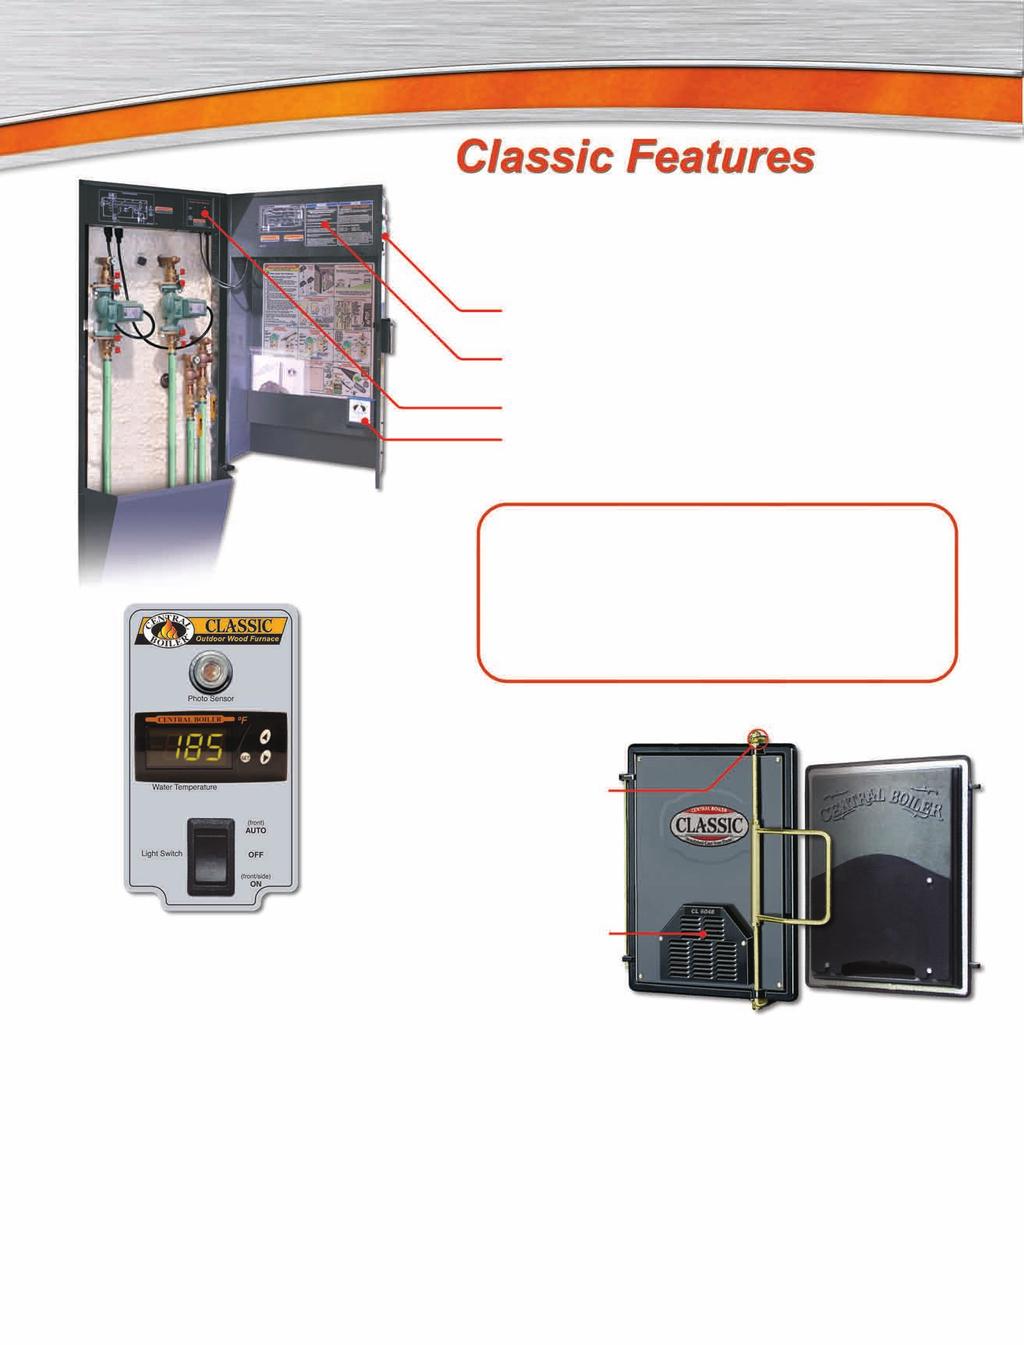 Central Boiler has developed a side panel pump cover for more convenient installation and easy access to pumps and power disconnect.